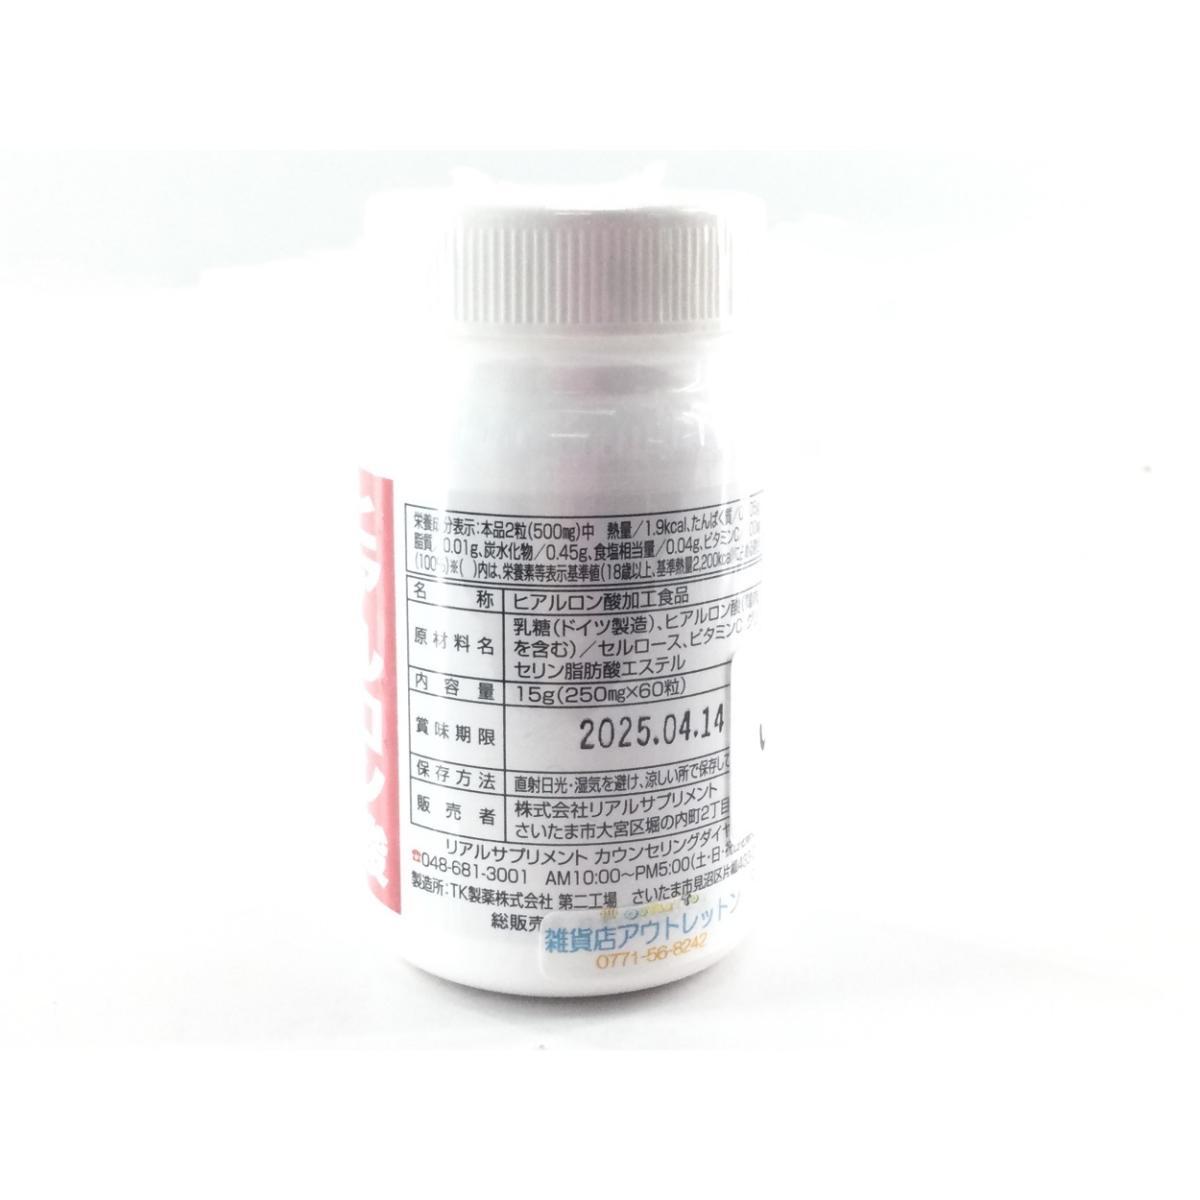  real supplement hyaluronic acid nutrition function food tablet approximately 30 day minute postage 250 jpy 